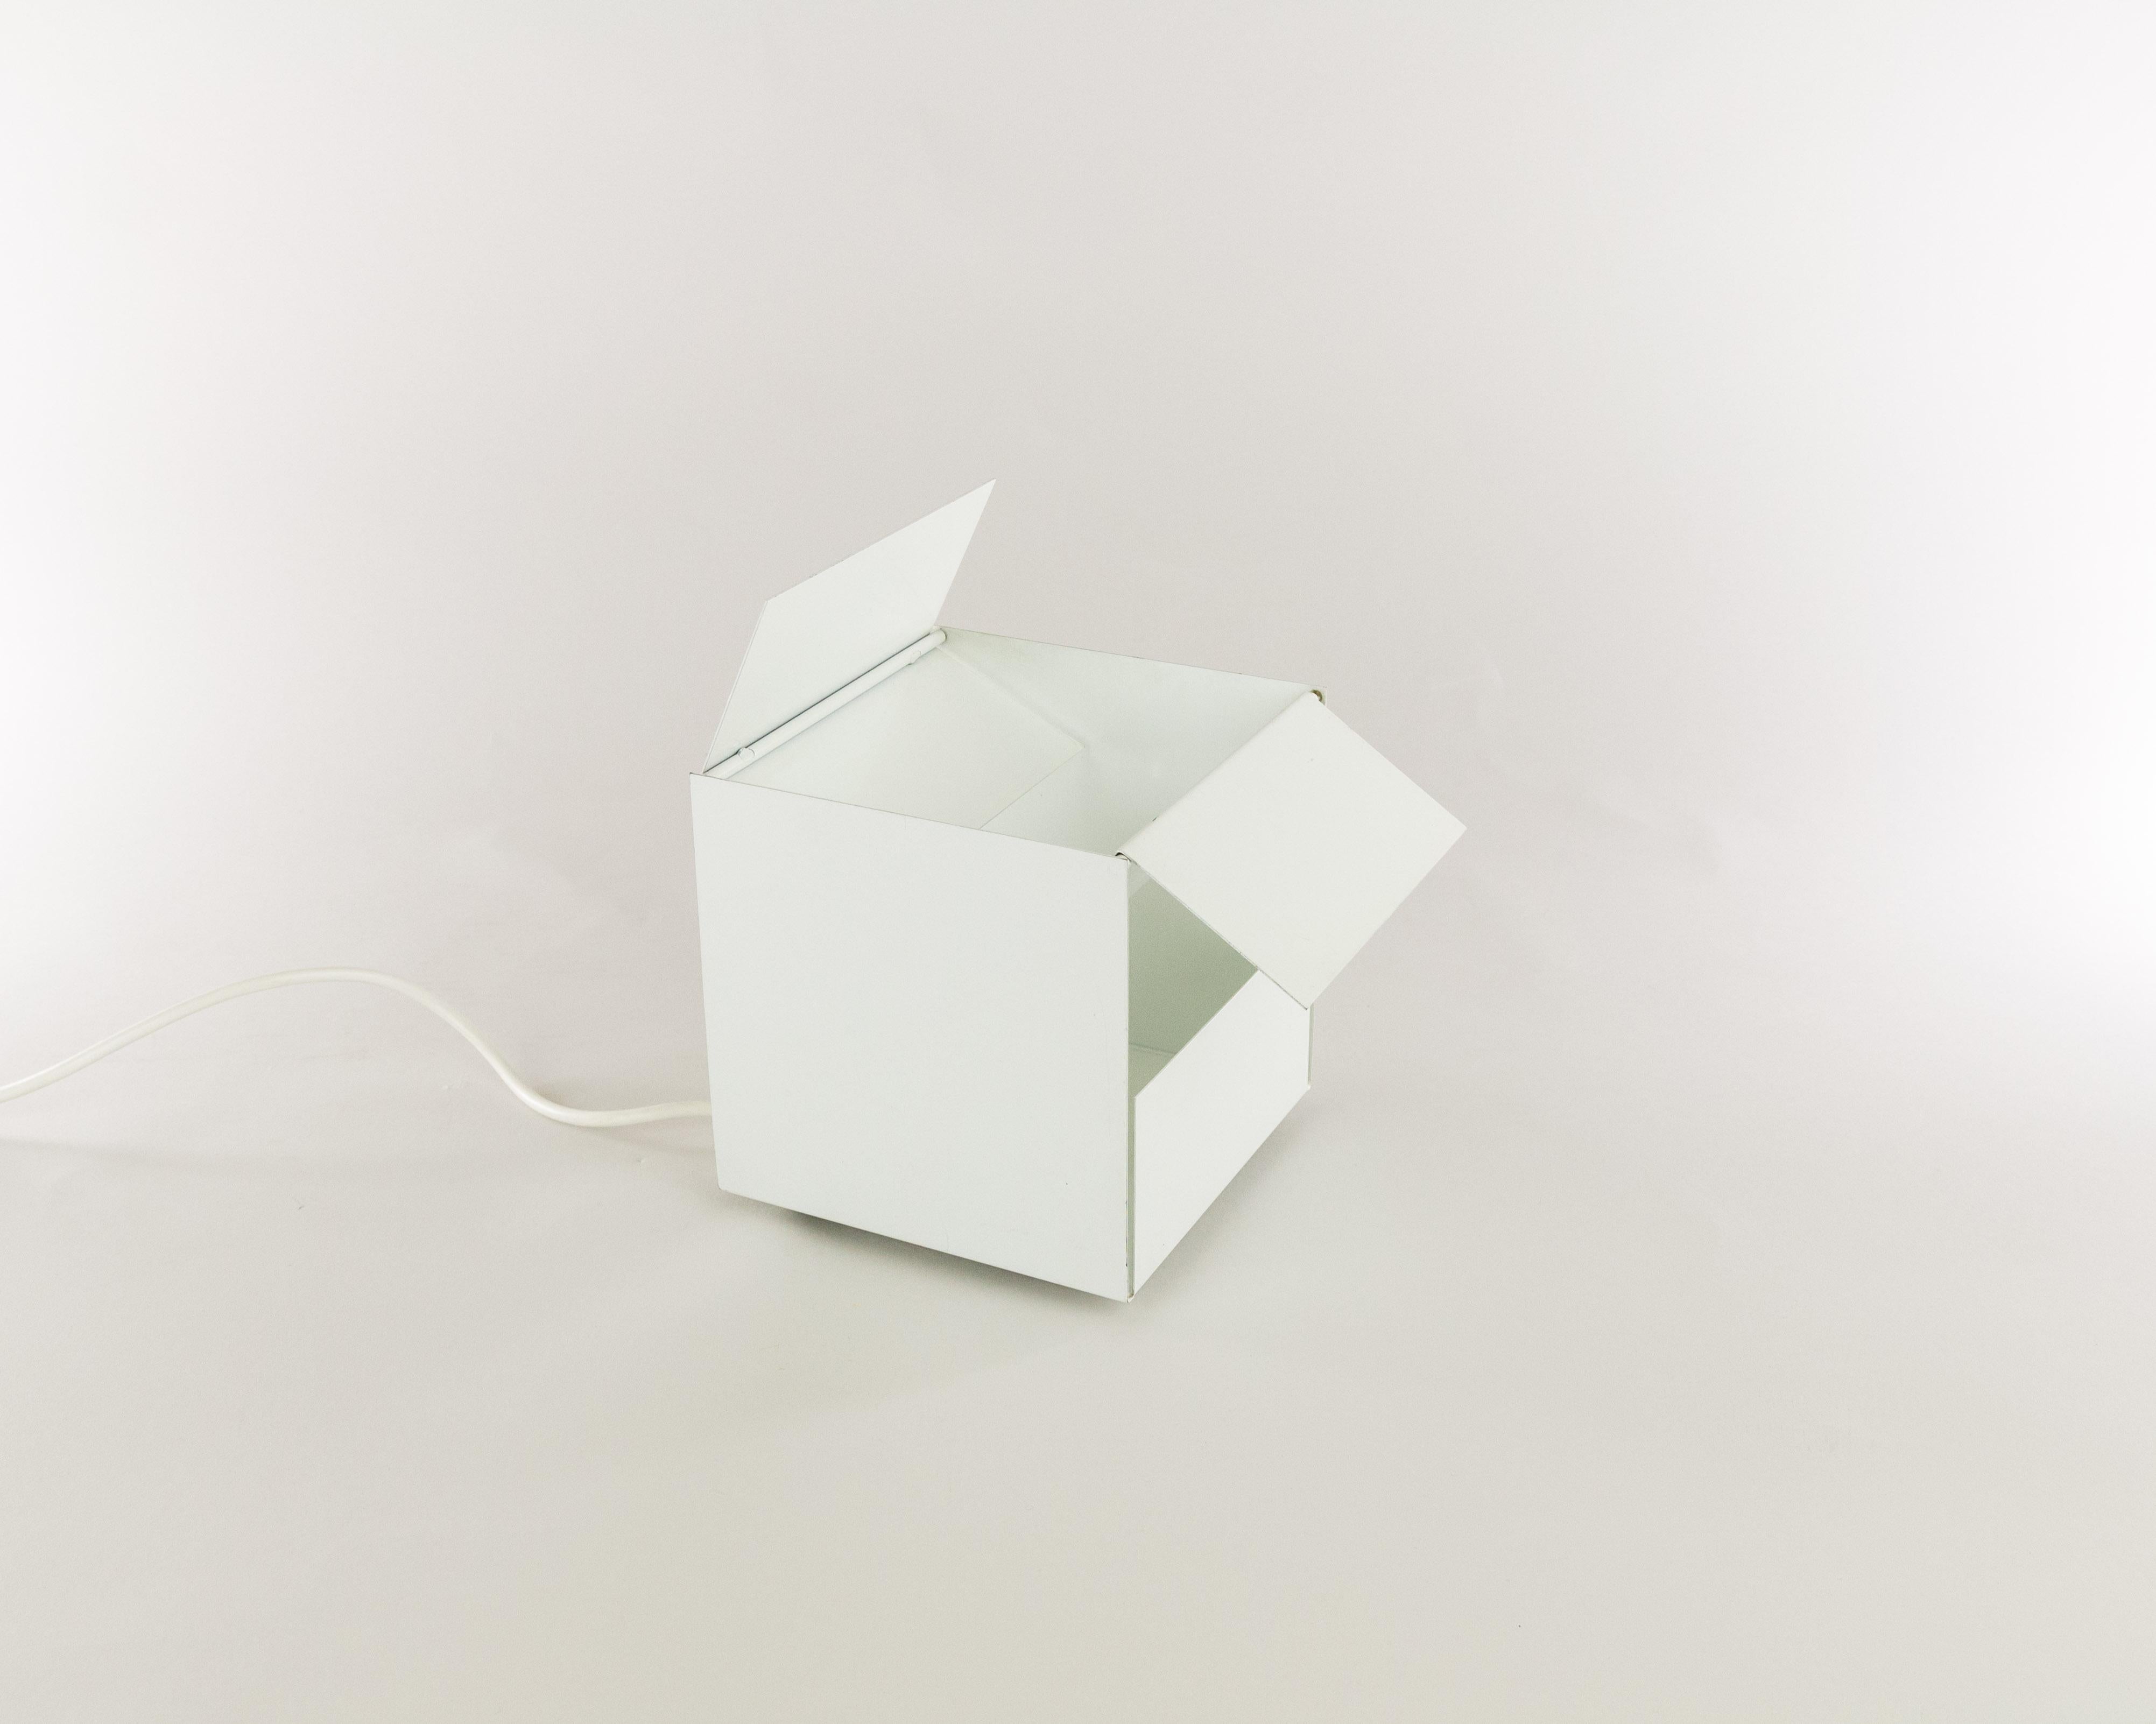 Paolo Tilche designed this small table lamp; model '3 H', for Italian manufacturer Sirrah. It is equipped with four magnetic feet (see picture) that can be placed on the sides of the cube and thus allow the lamp to be used in different positions.